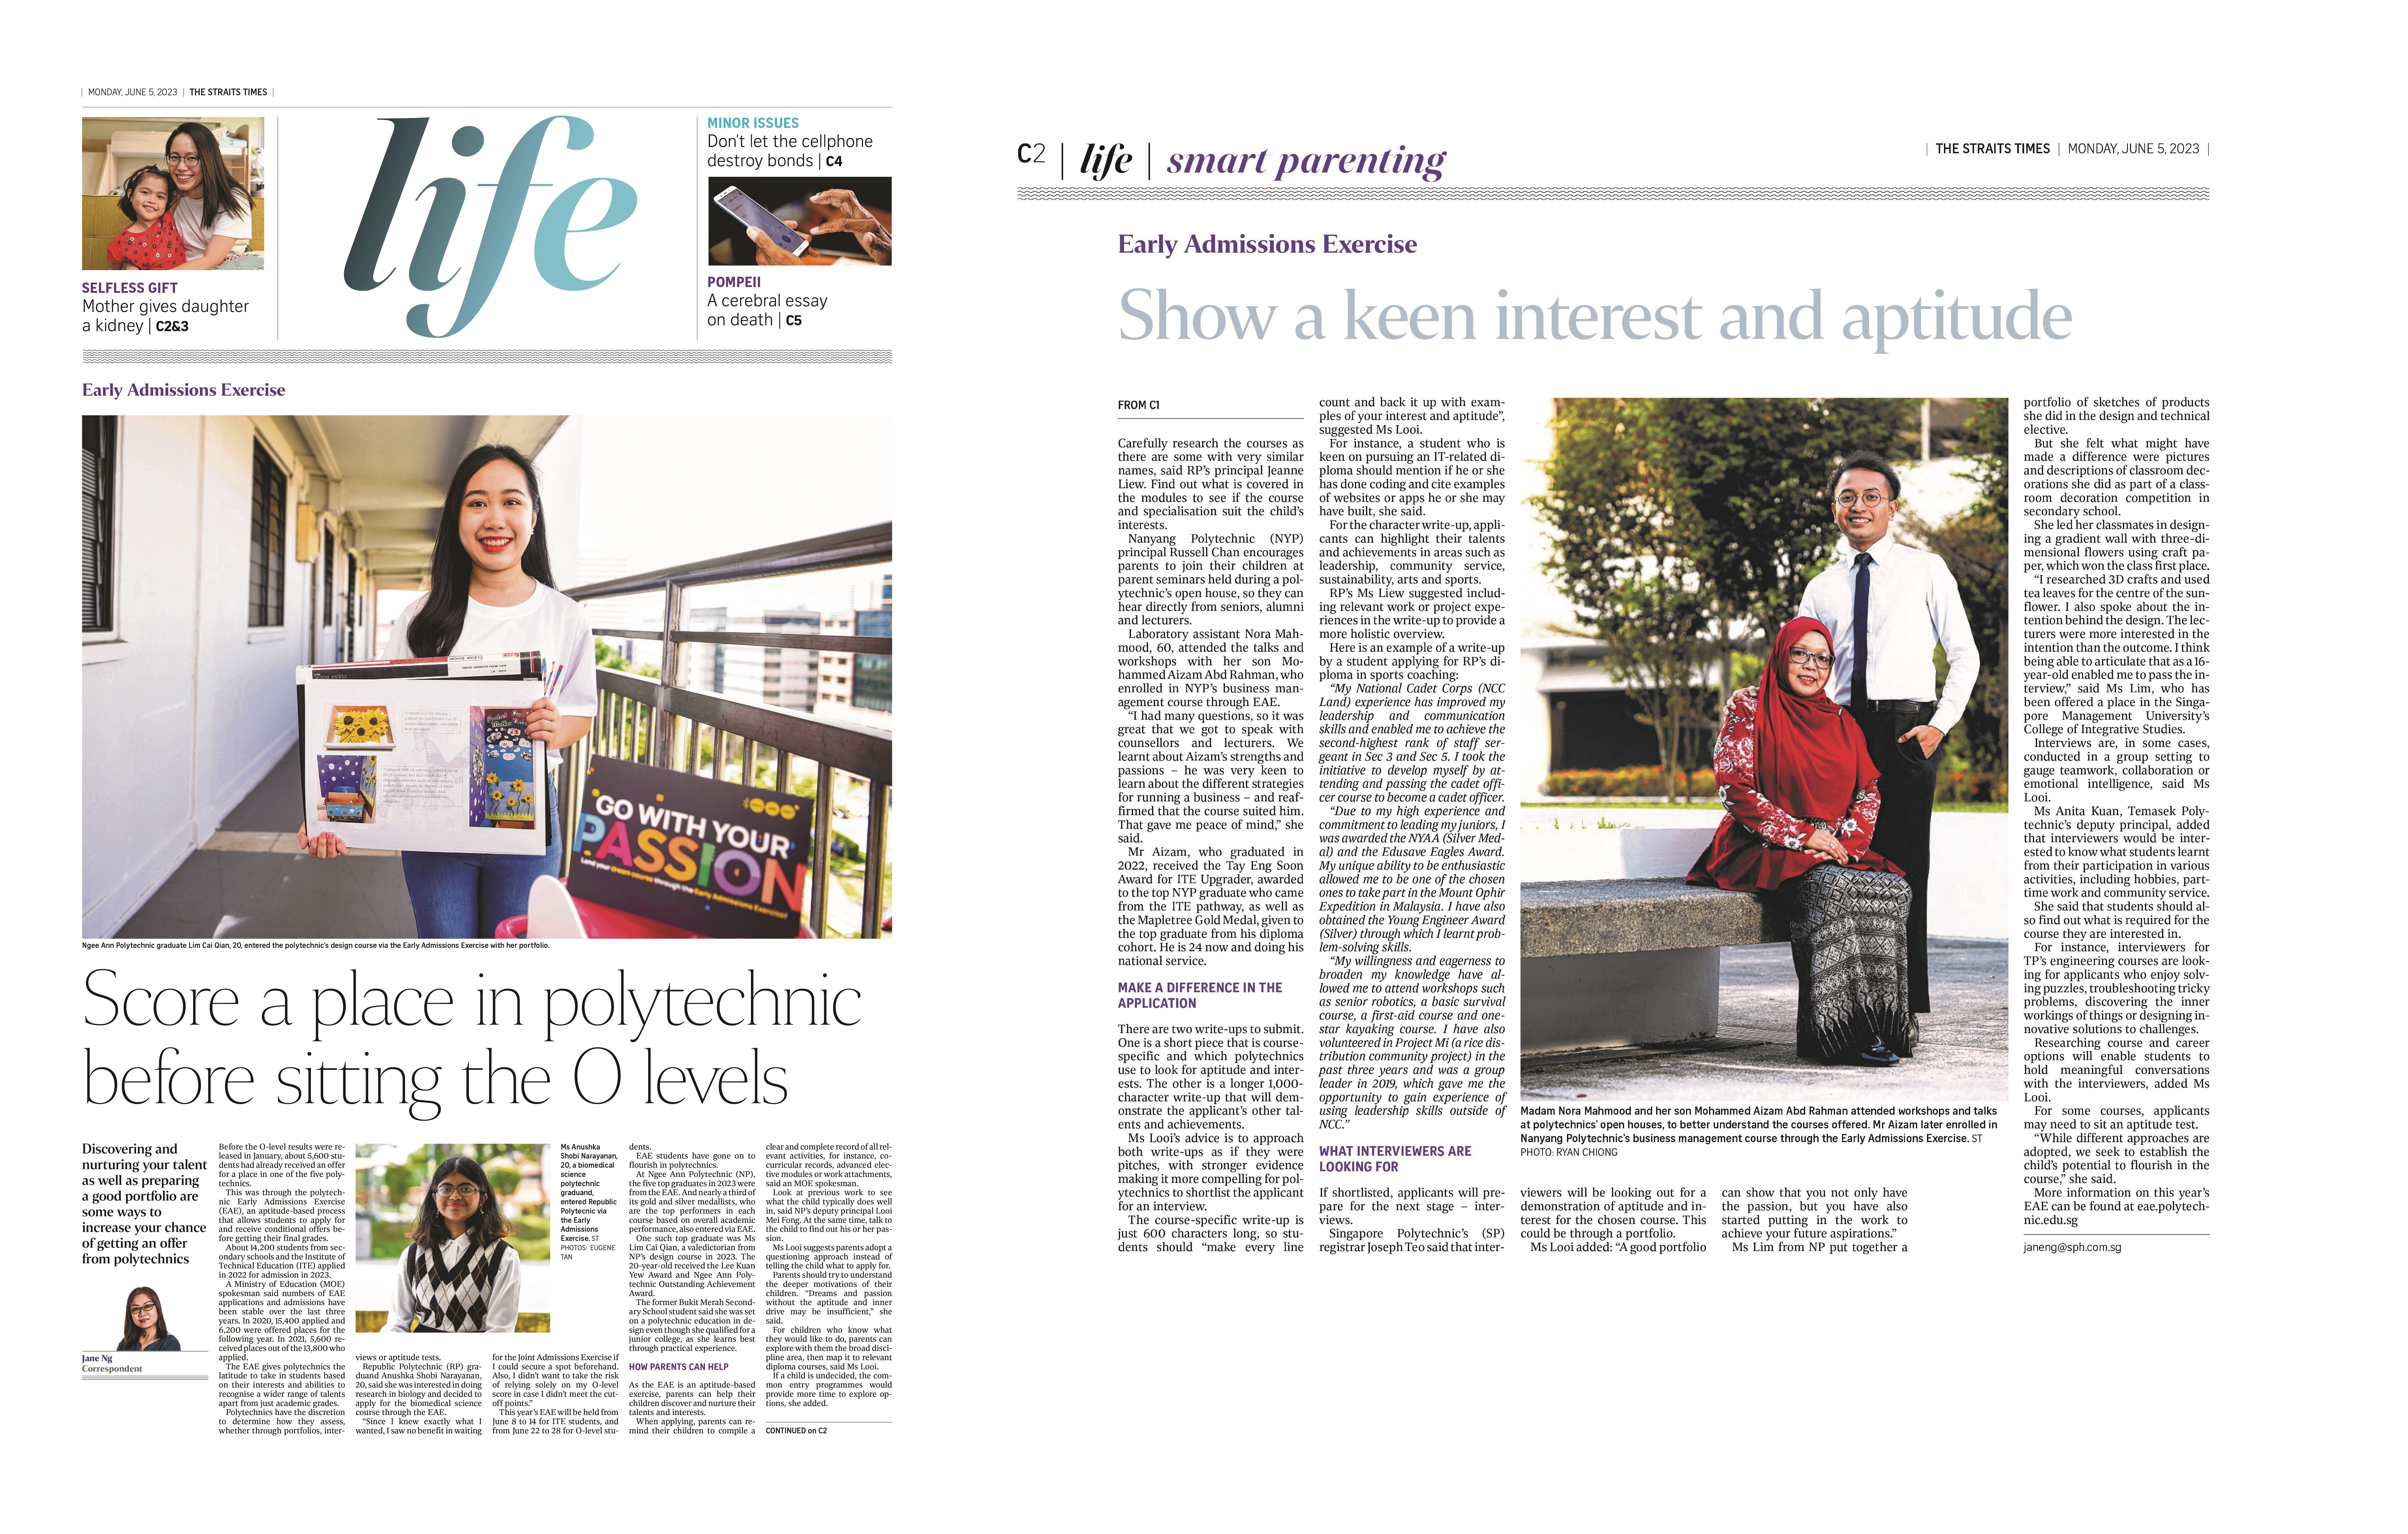 Article on EAE on Straits Times